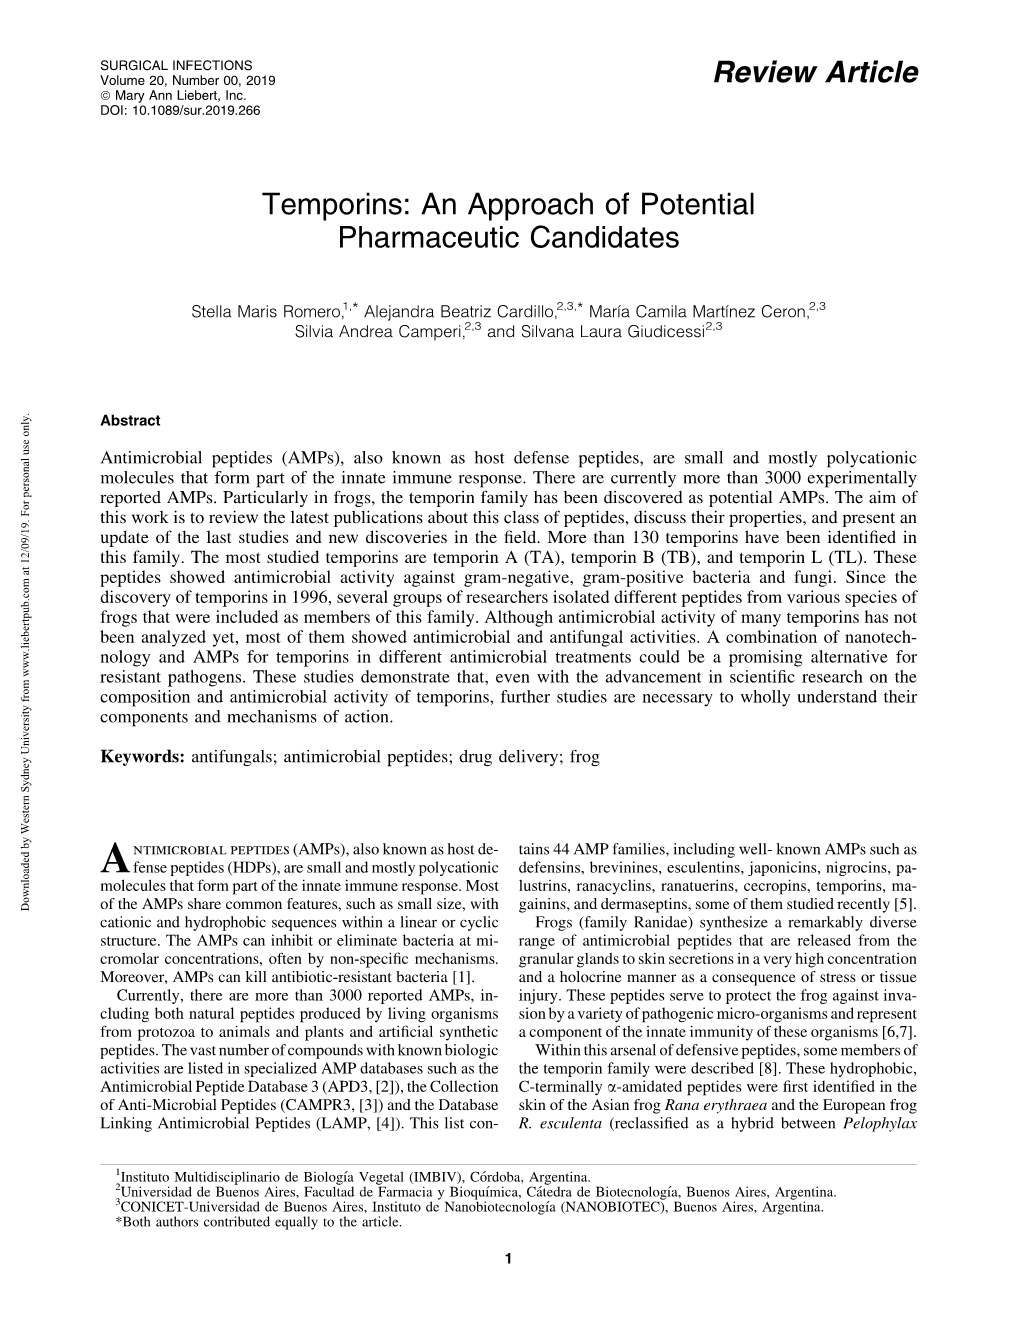 Temporins: an Approach of Potential Pharmaceutic Candidates